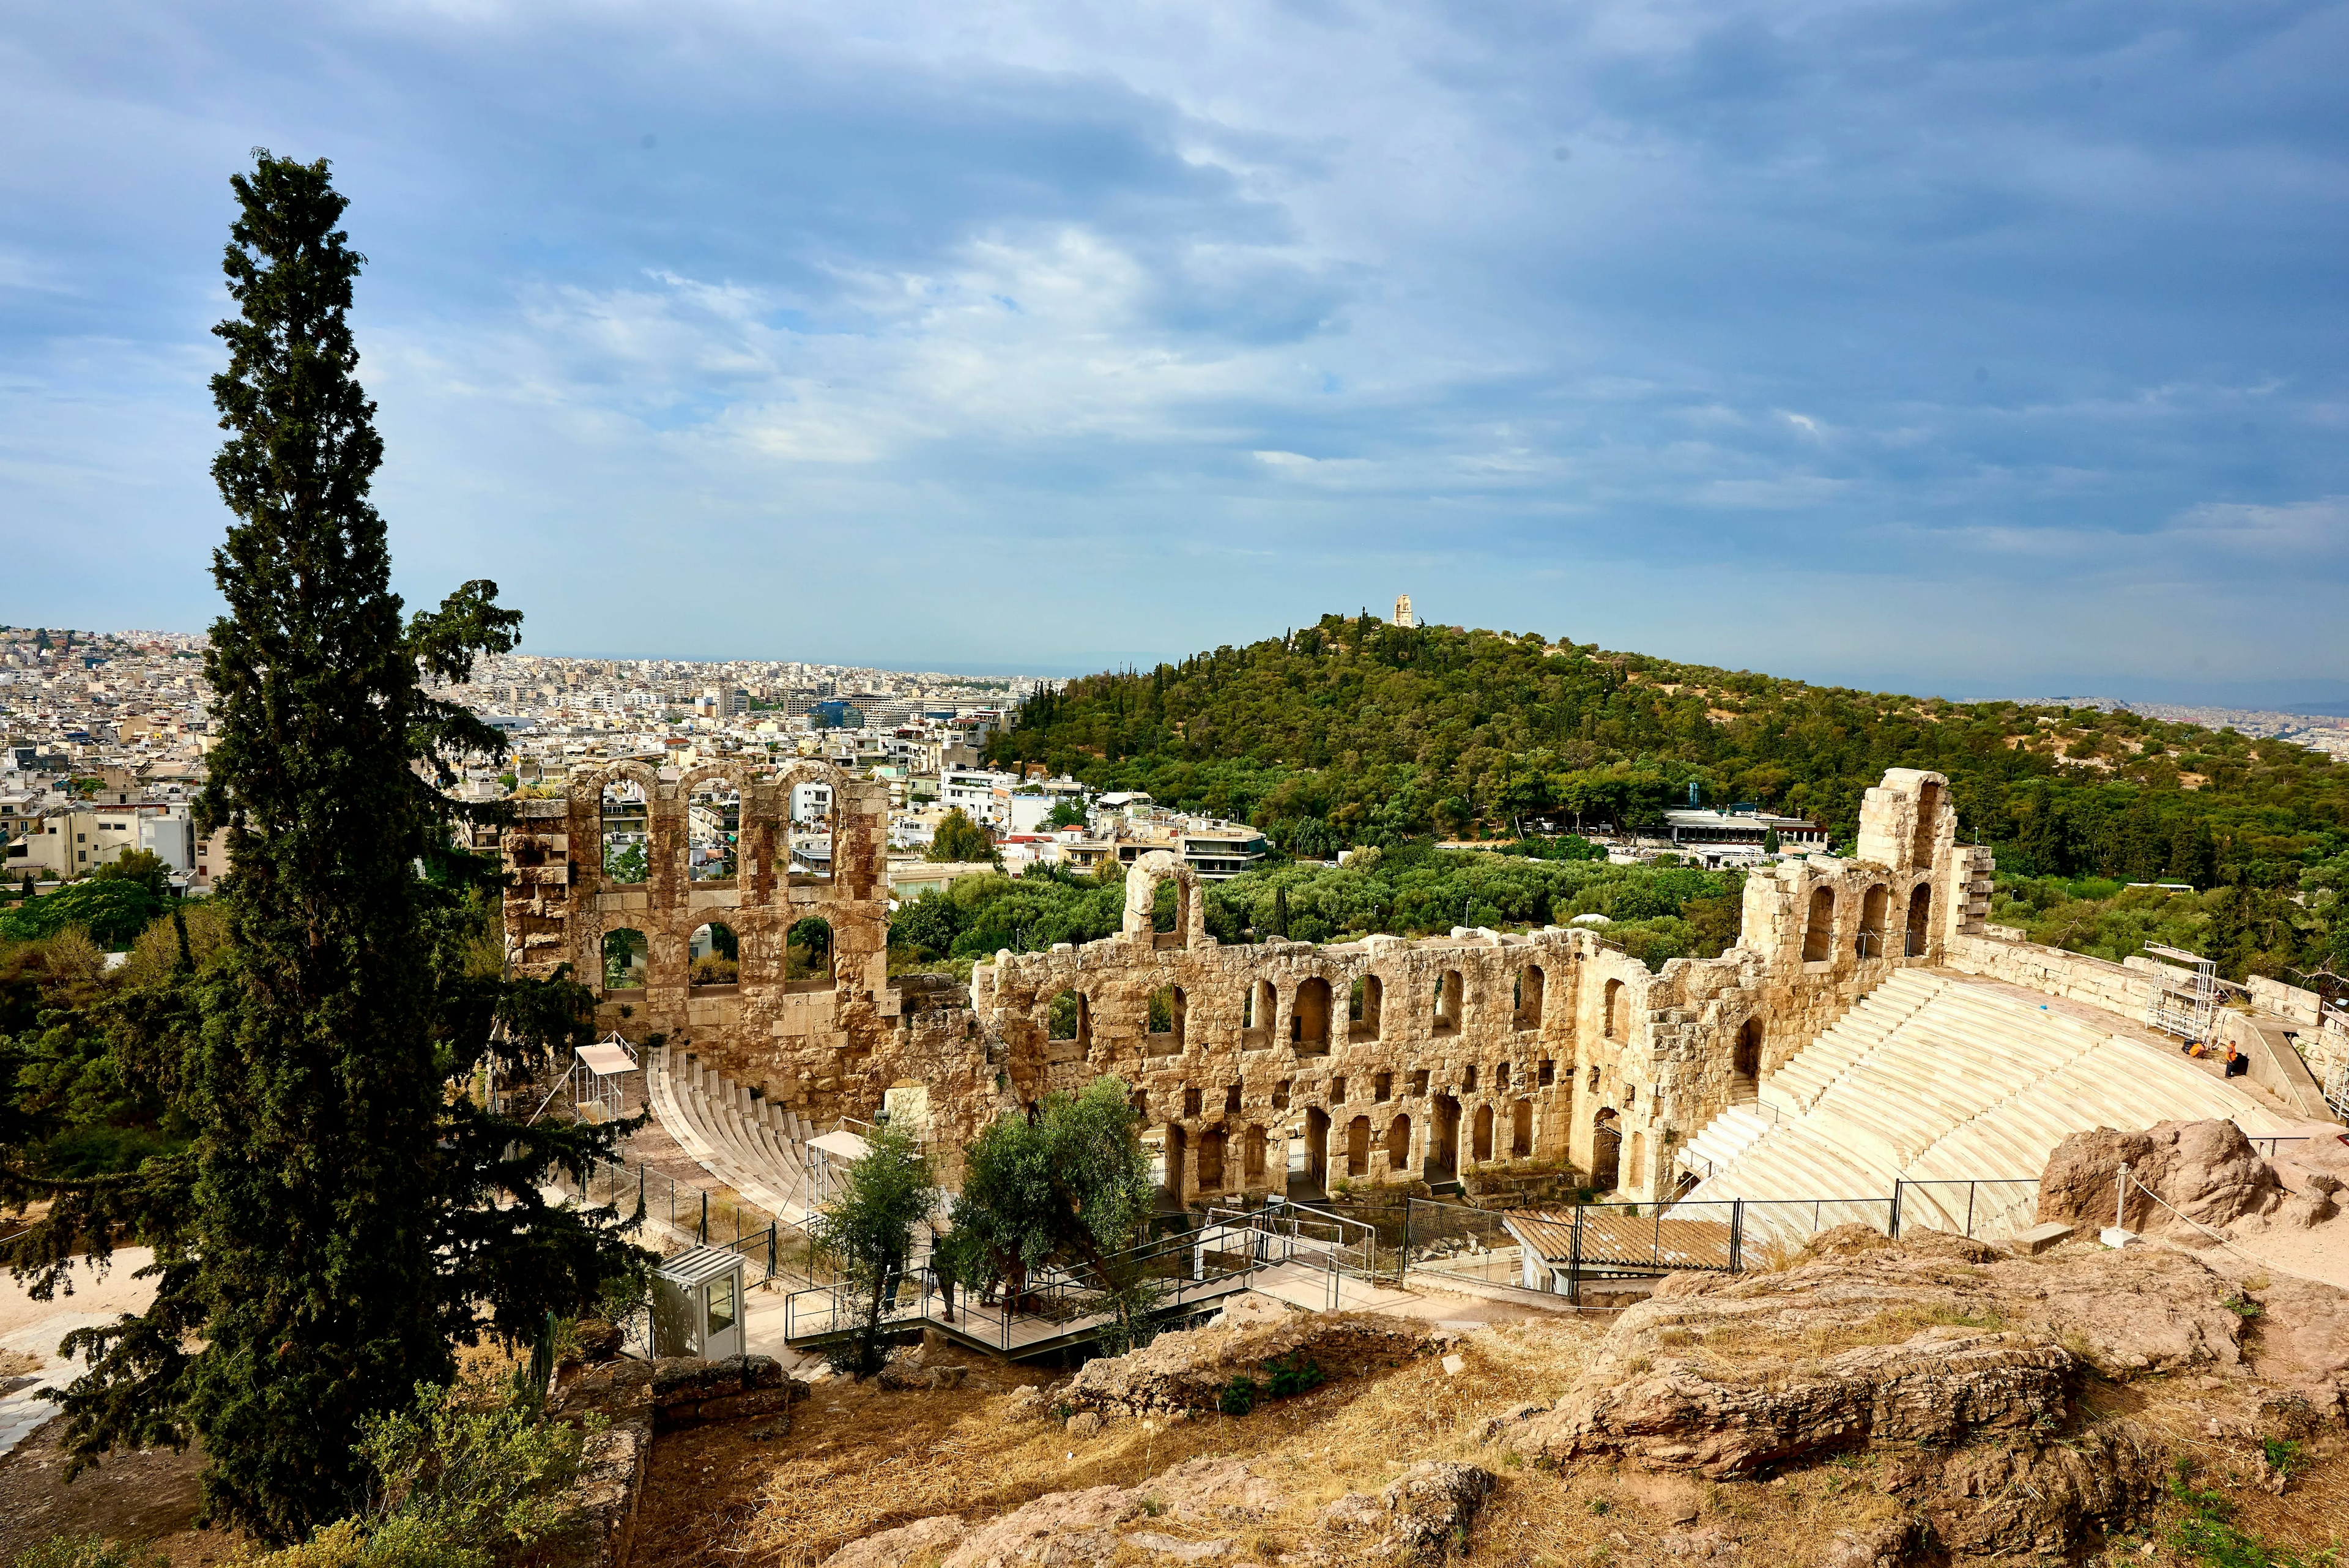 Traveler's Guide To The Acropolis In Athens